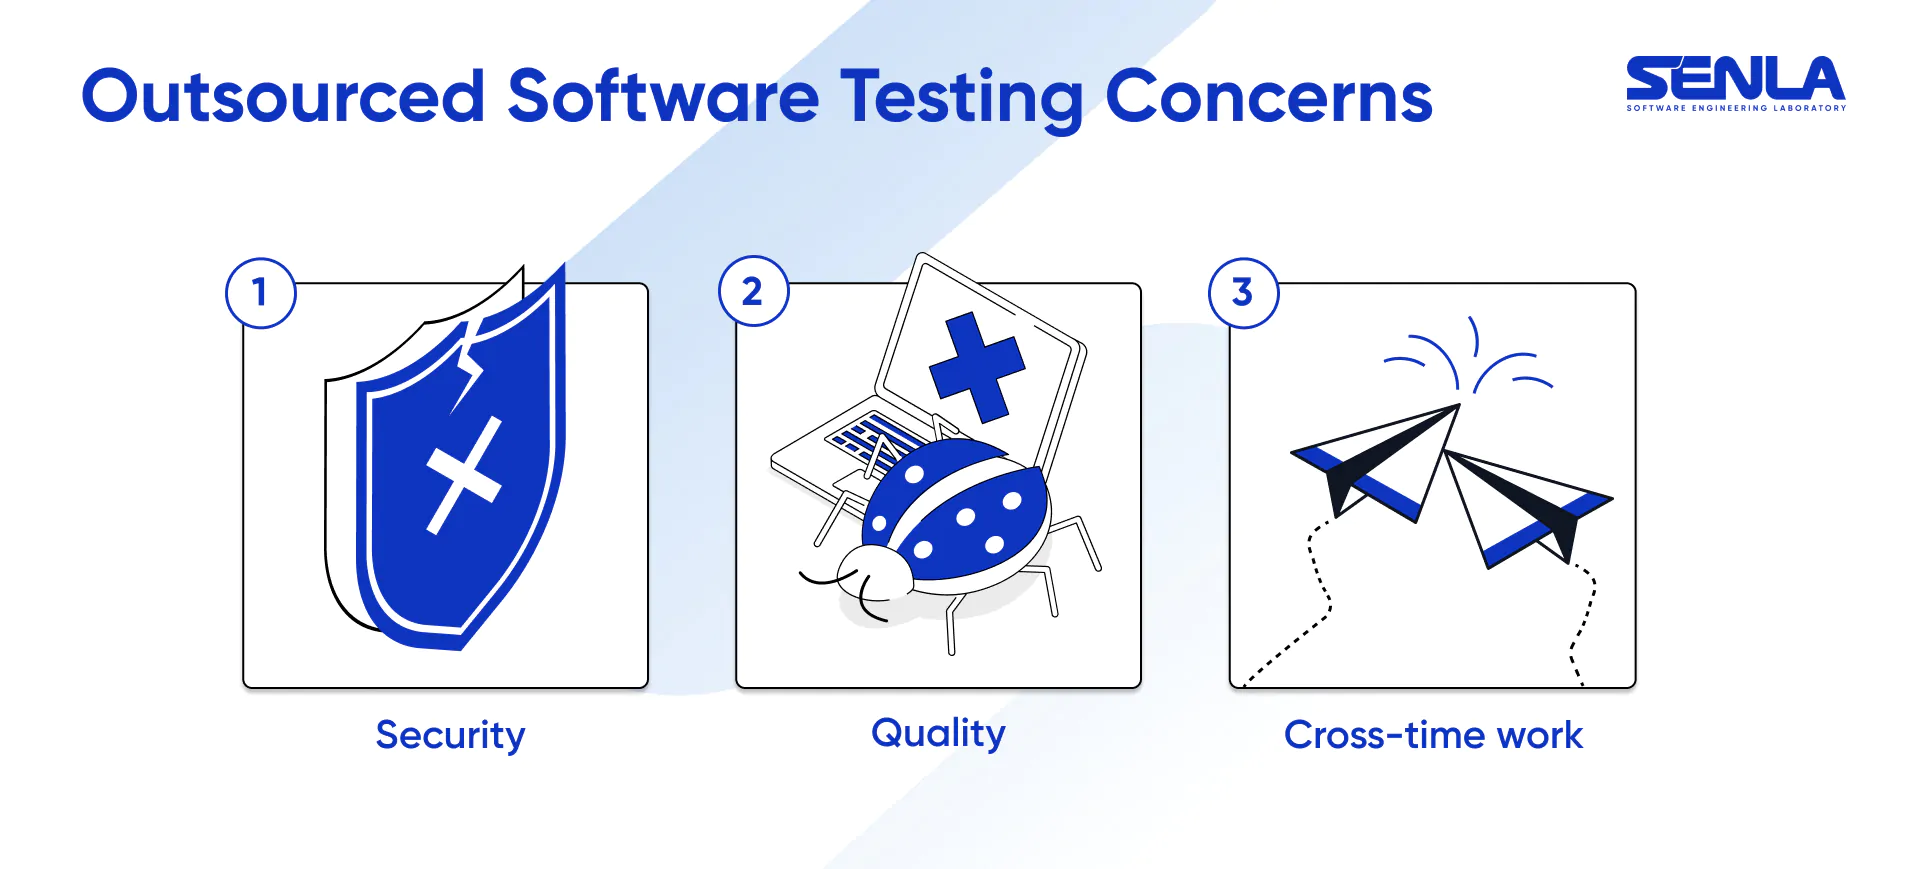 Outsourced software testing concerns PC